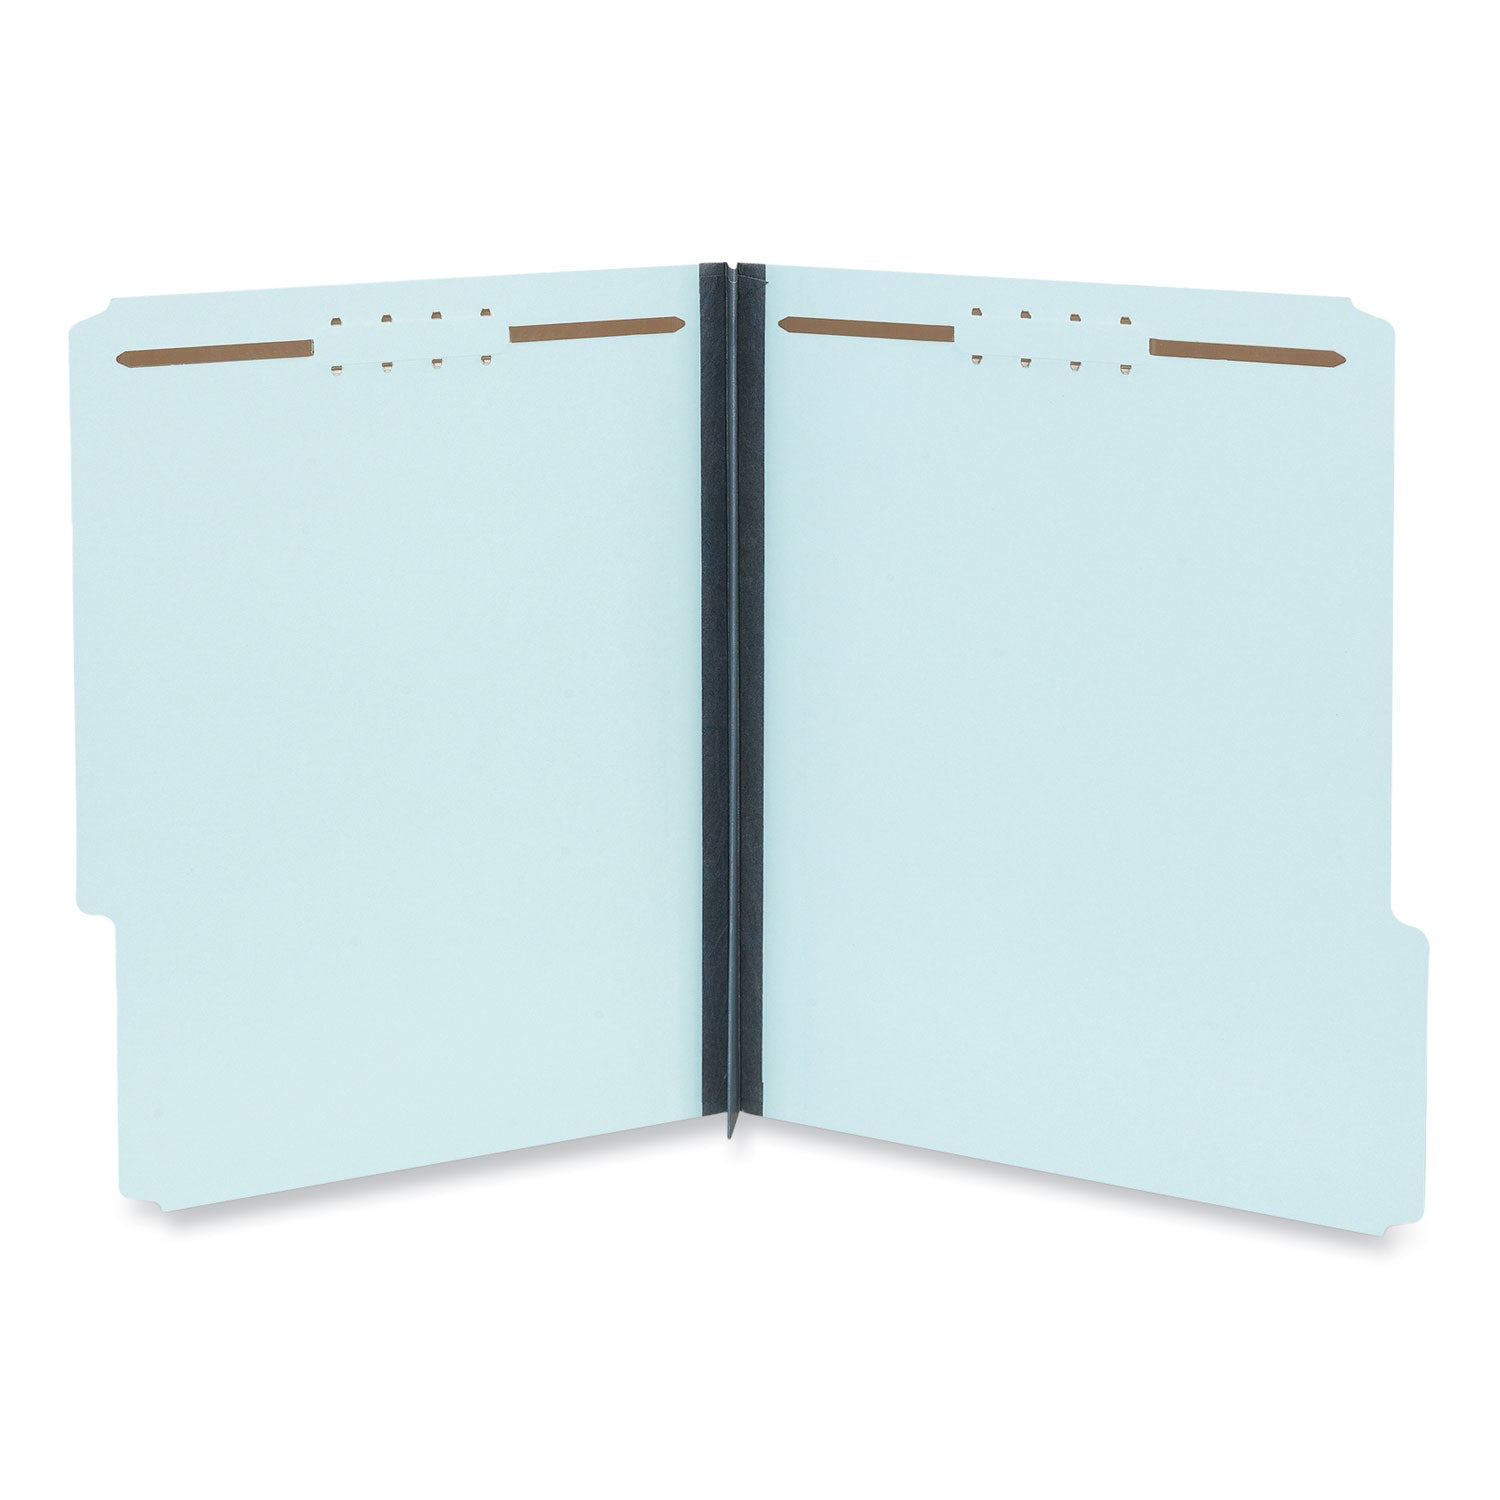 top-tab-classification-folders-2-expansion-2-fasteners-letter-size-light-blue-exterior-25-box_unv10401 - 1